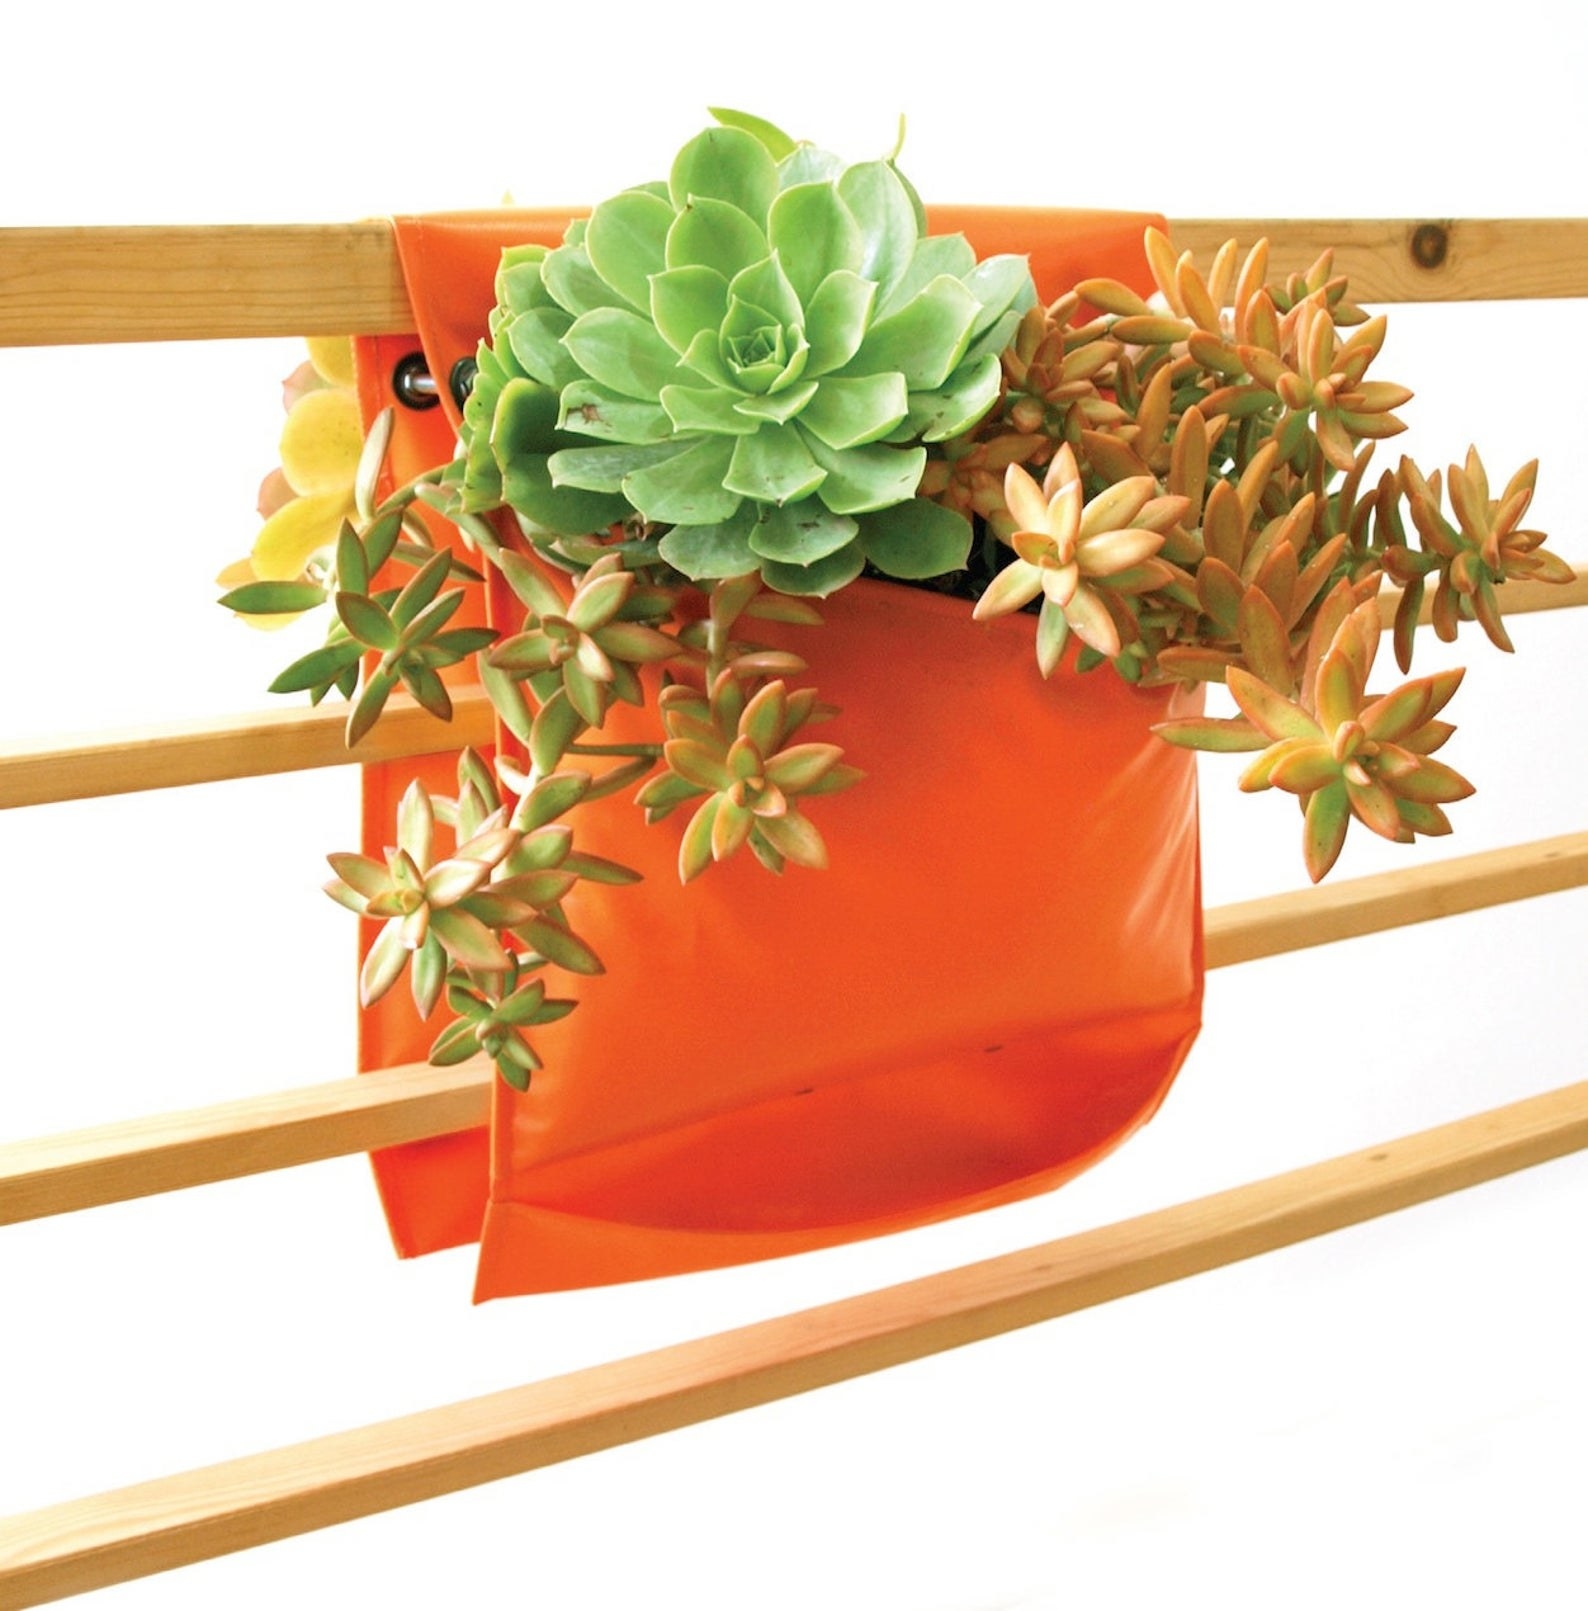 the saddle planter on the rails with a plant in it